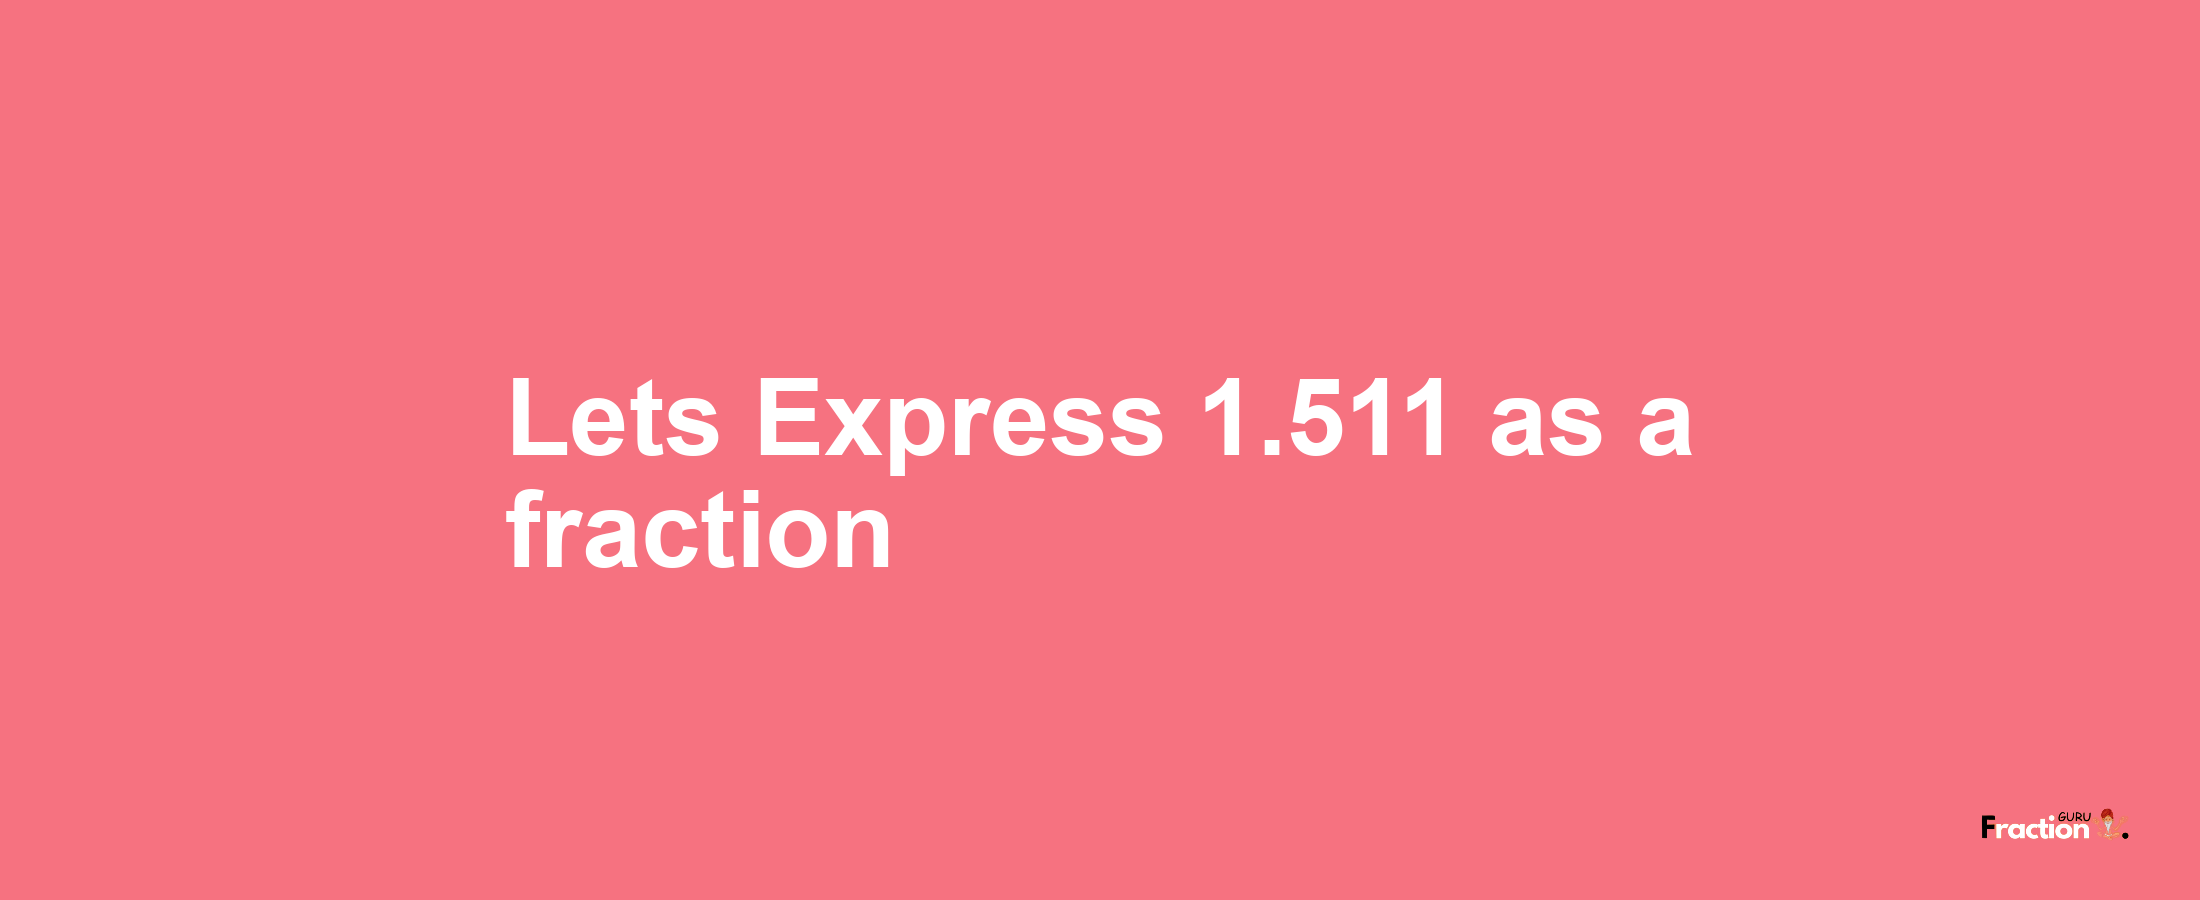 Lets Express 1.511 as afraction